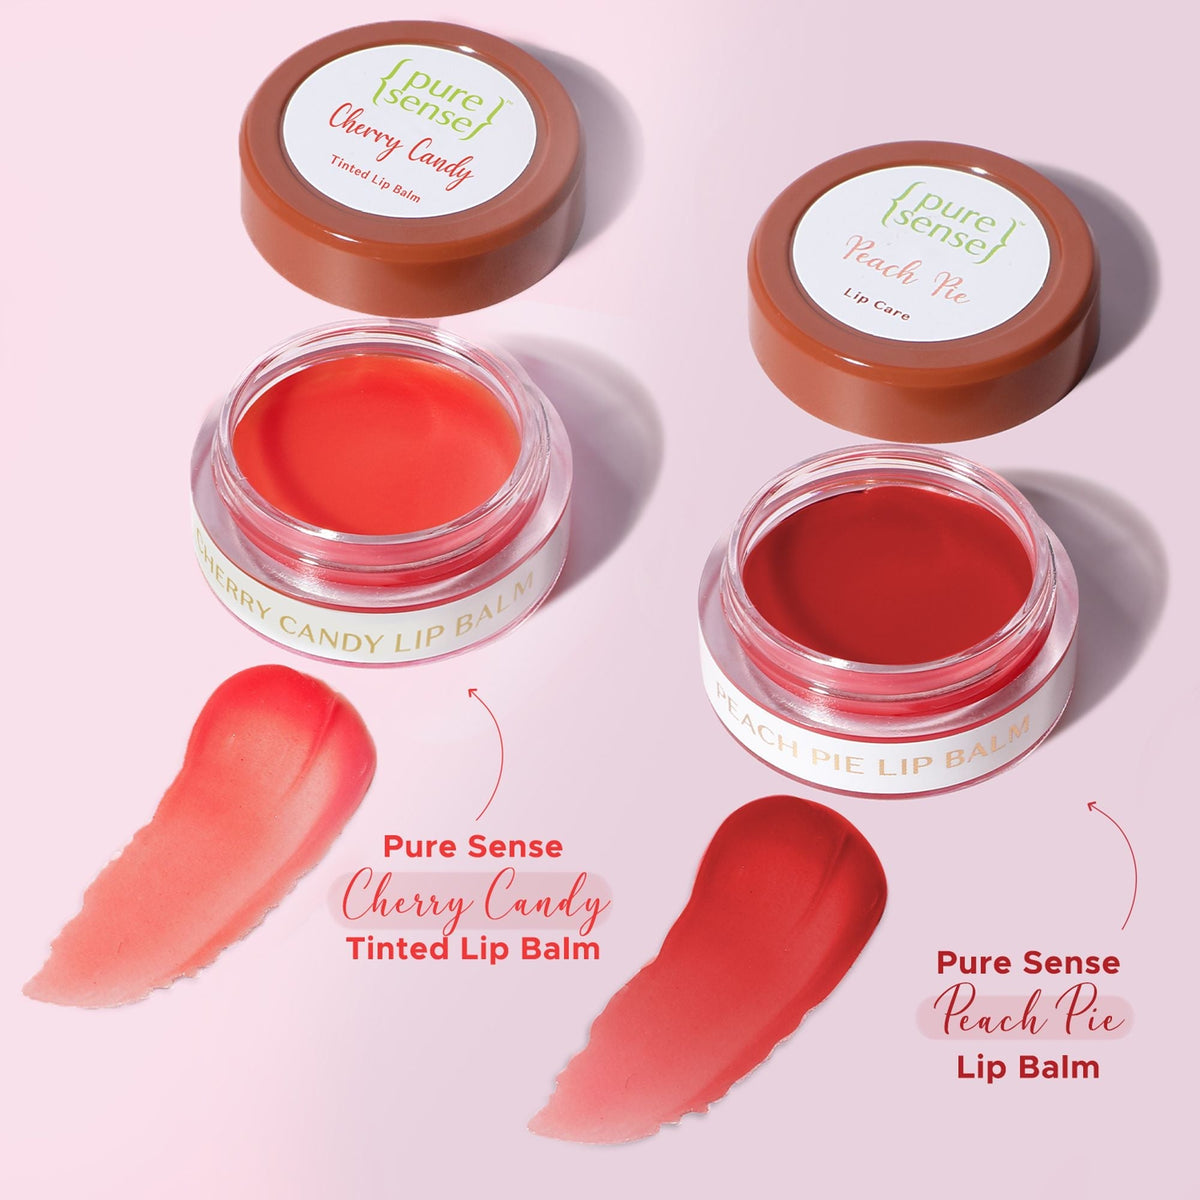 Cherry Candy Tinted Lip Balm 5ml + Pure Sense Strawberry Slush Lip Balm 5m | Pack of 2 | From the makers of Parachute Advansed | 10ml